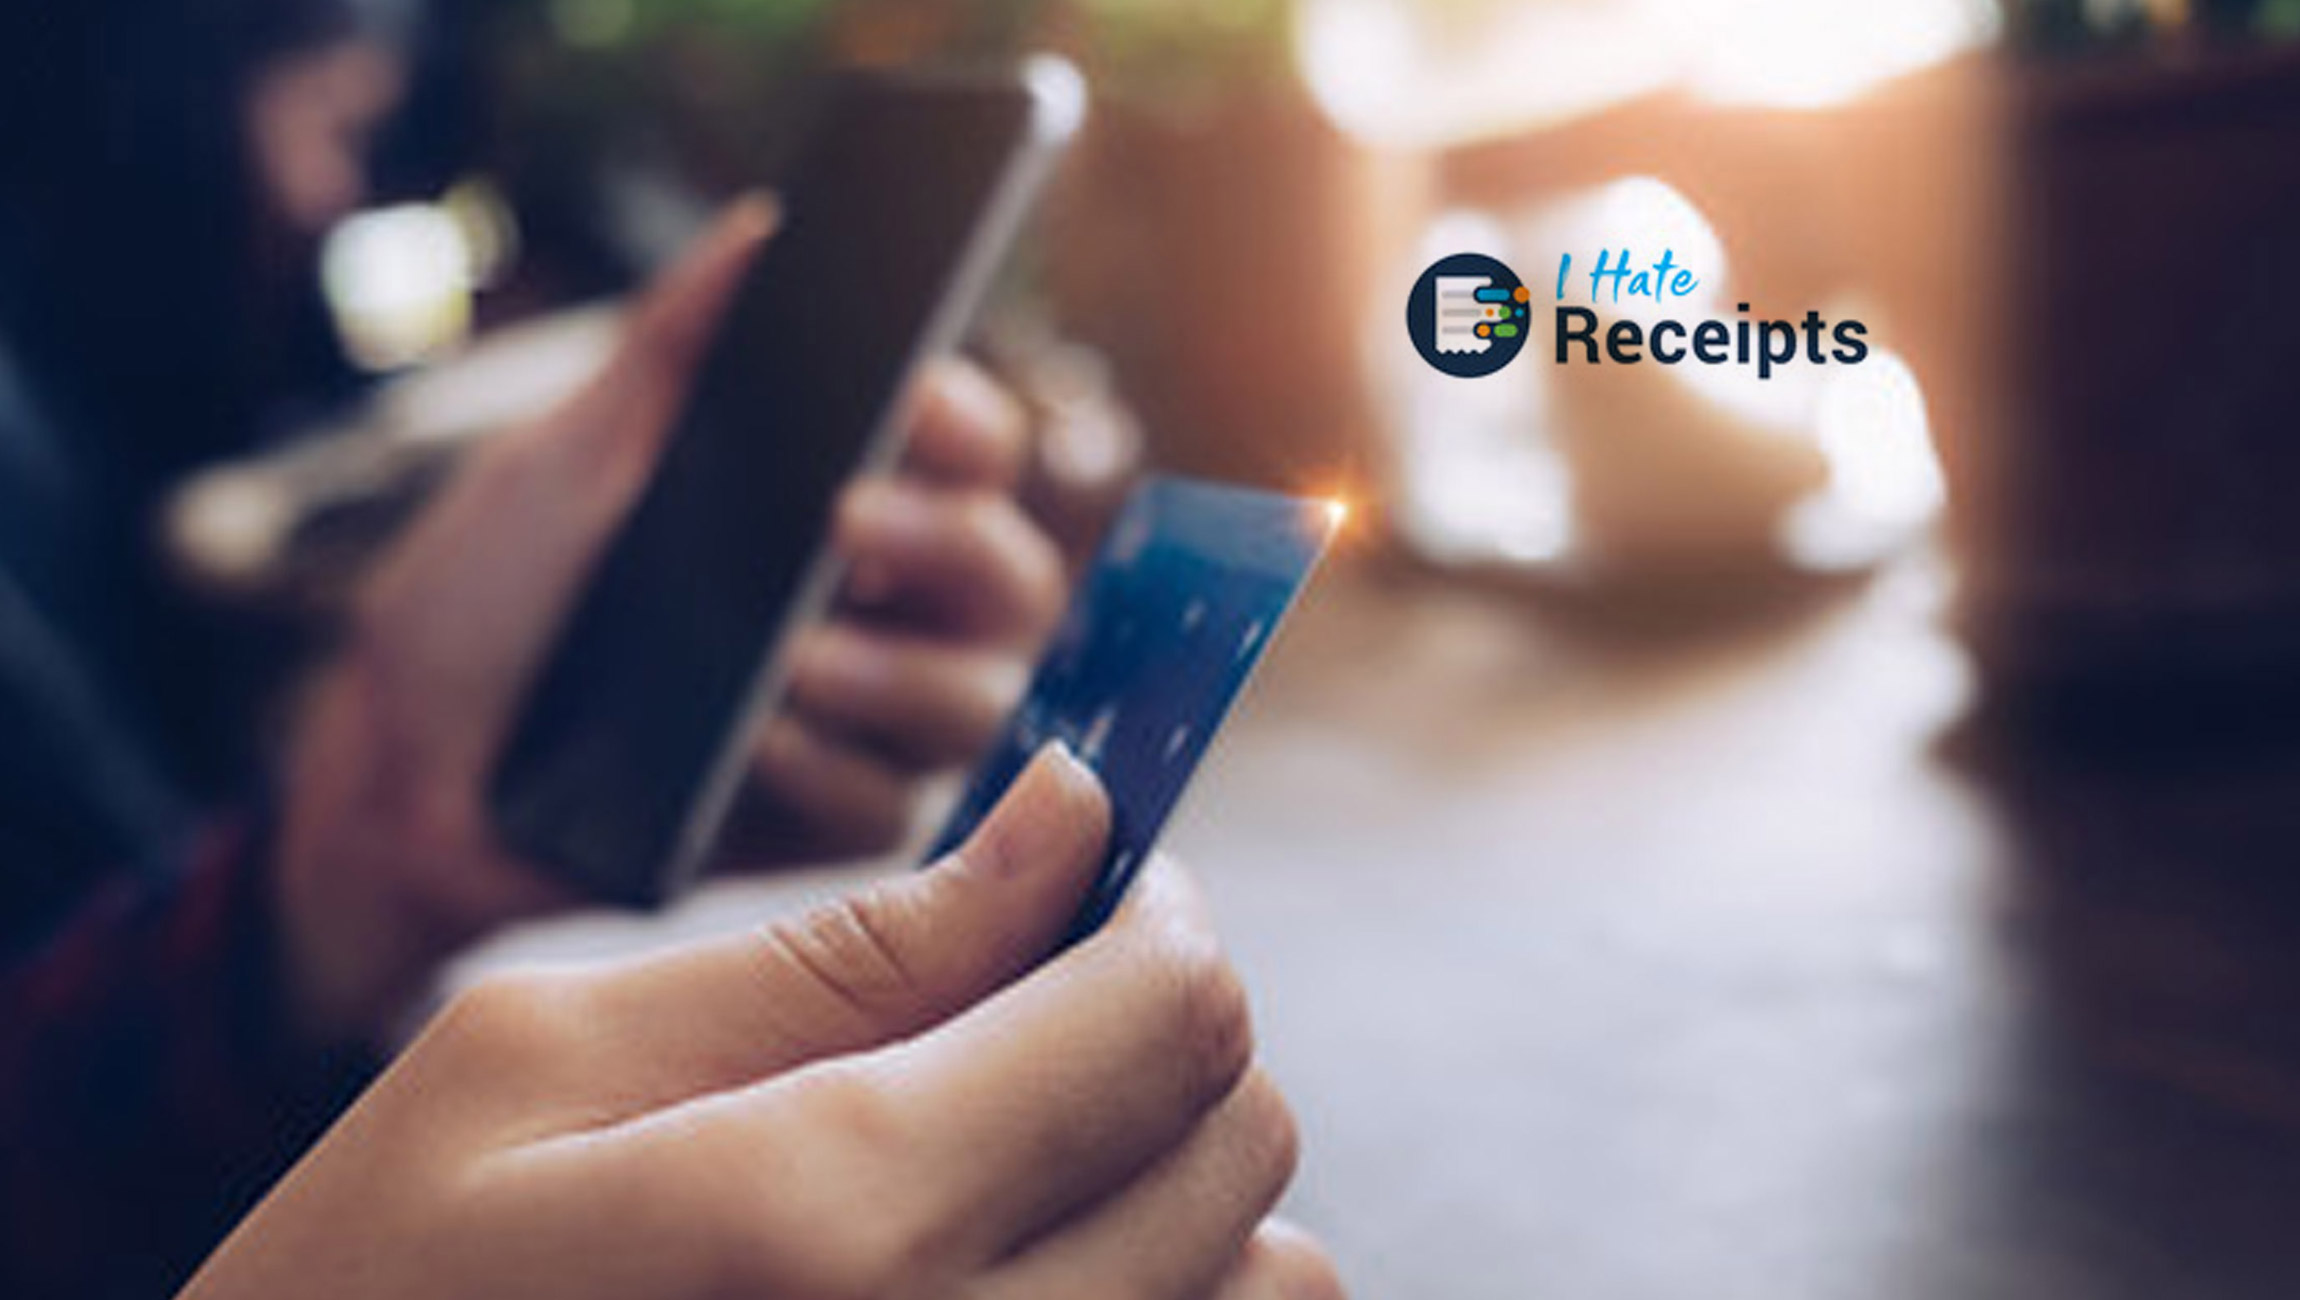 I Hate Receipts Launches Merchant Alliance Network to Drive Adoption of Contactless HD Receipts™